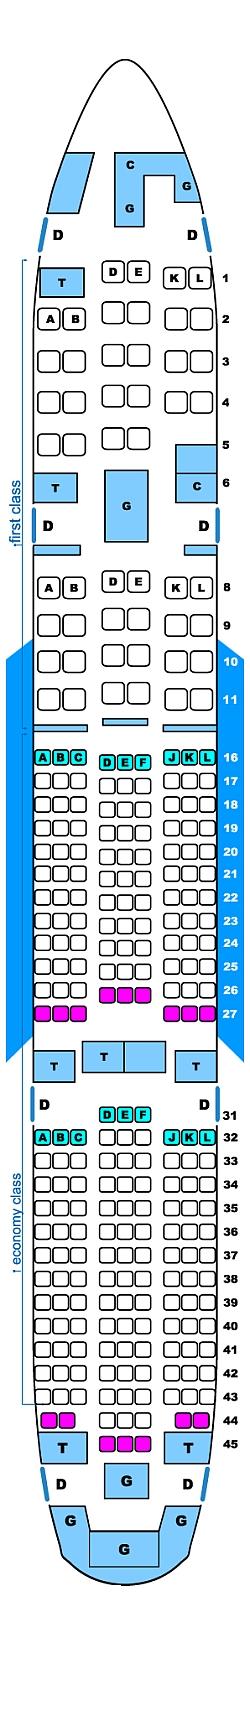 Seat map for Continental Airlines Boeing B777 200ER